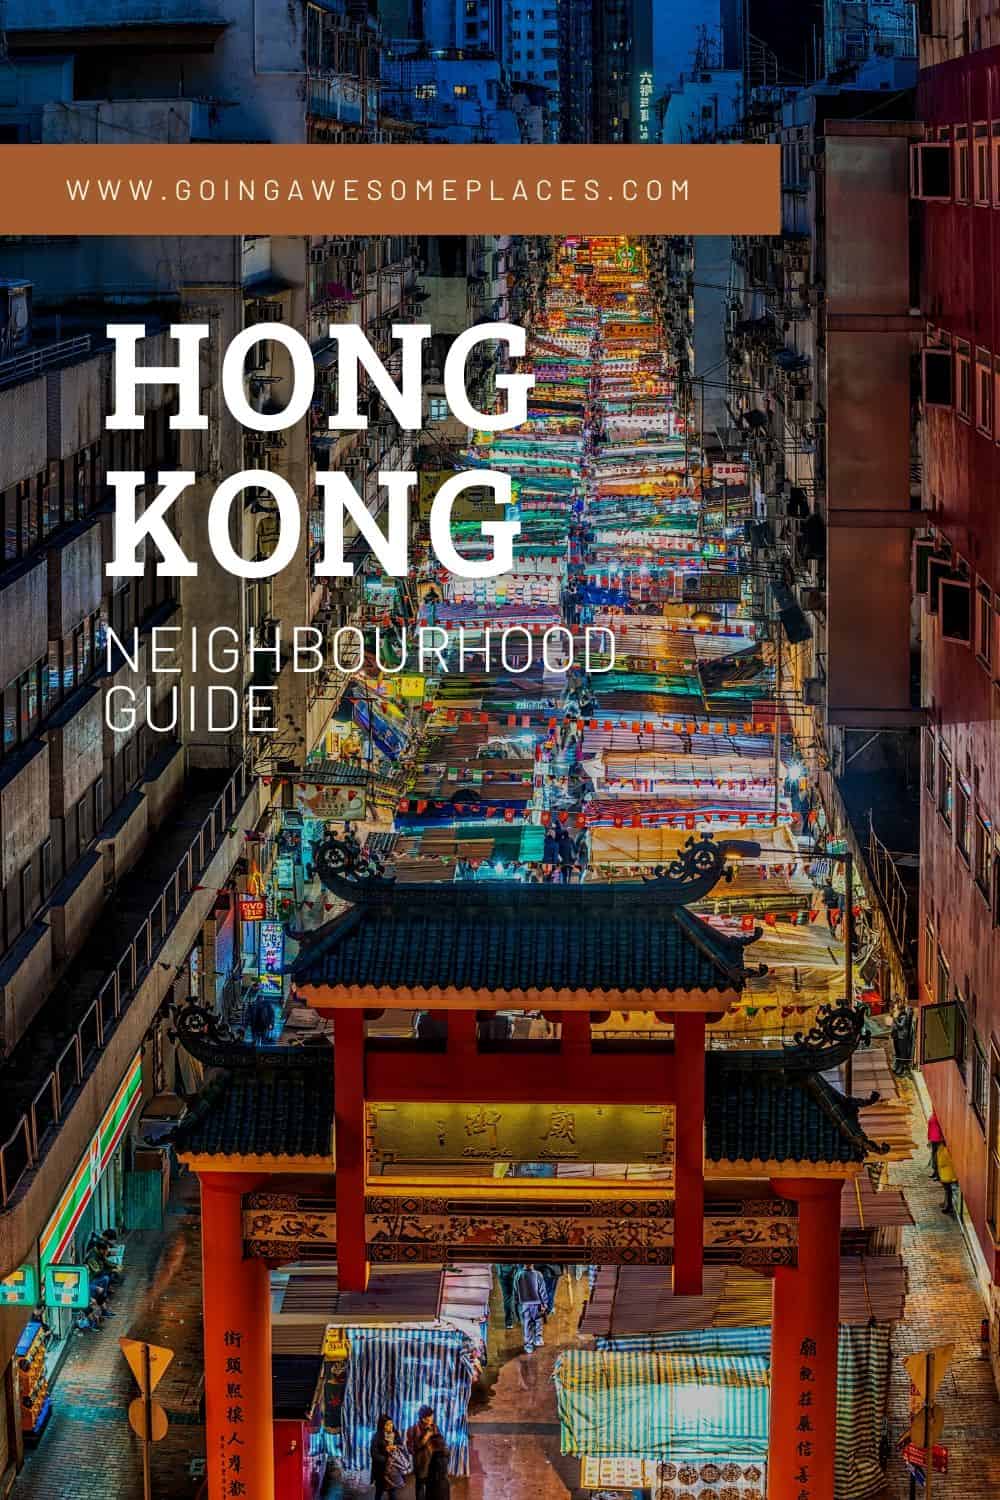 Where To Stay in Hong Kong – A Guide To Hotels and Neighbourhoods